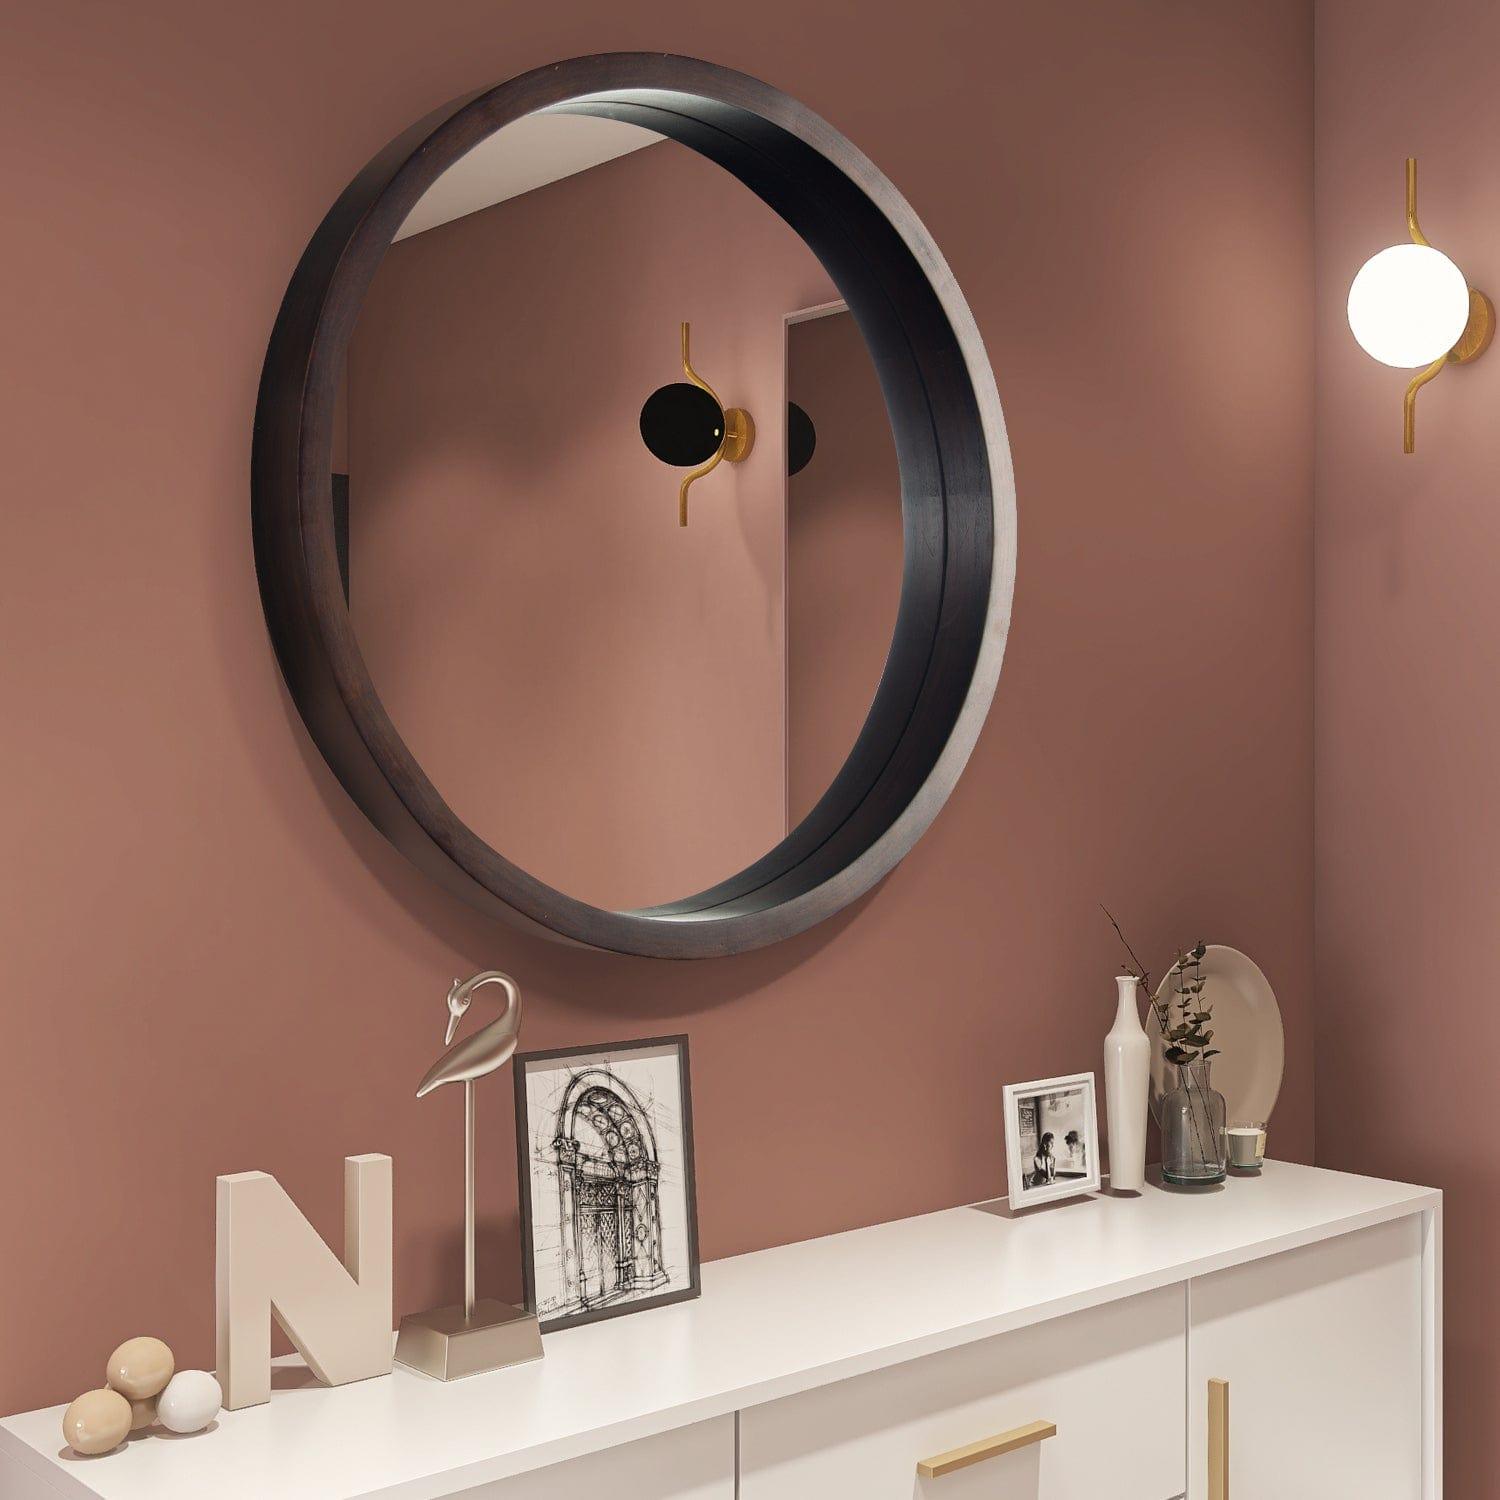 Shop Circle Mirror with Wood Frame, Round Modern Decoration Large Mirror for Bathroom Living Room Bedroom Entryway, Walnut Brown, 24" Mademoiselle Home Decor